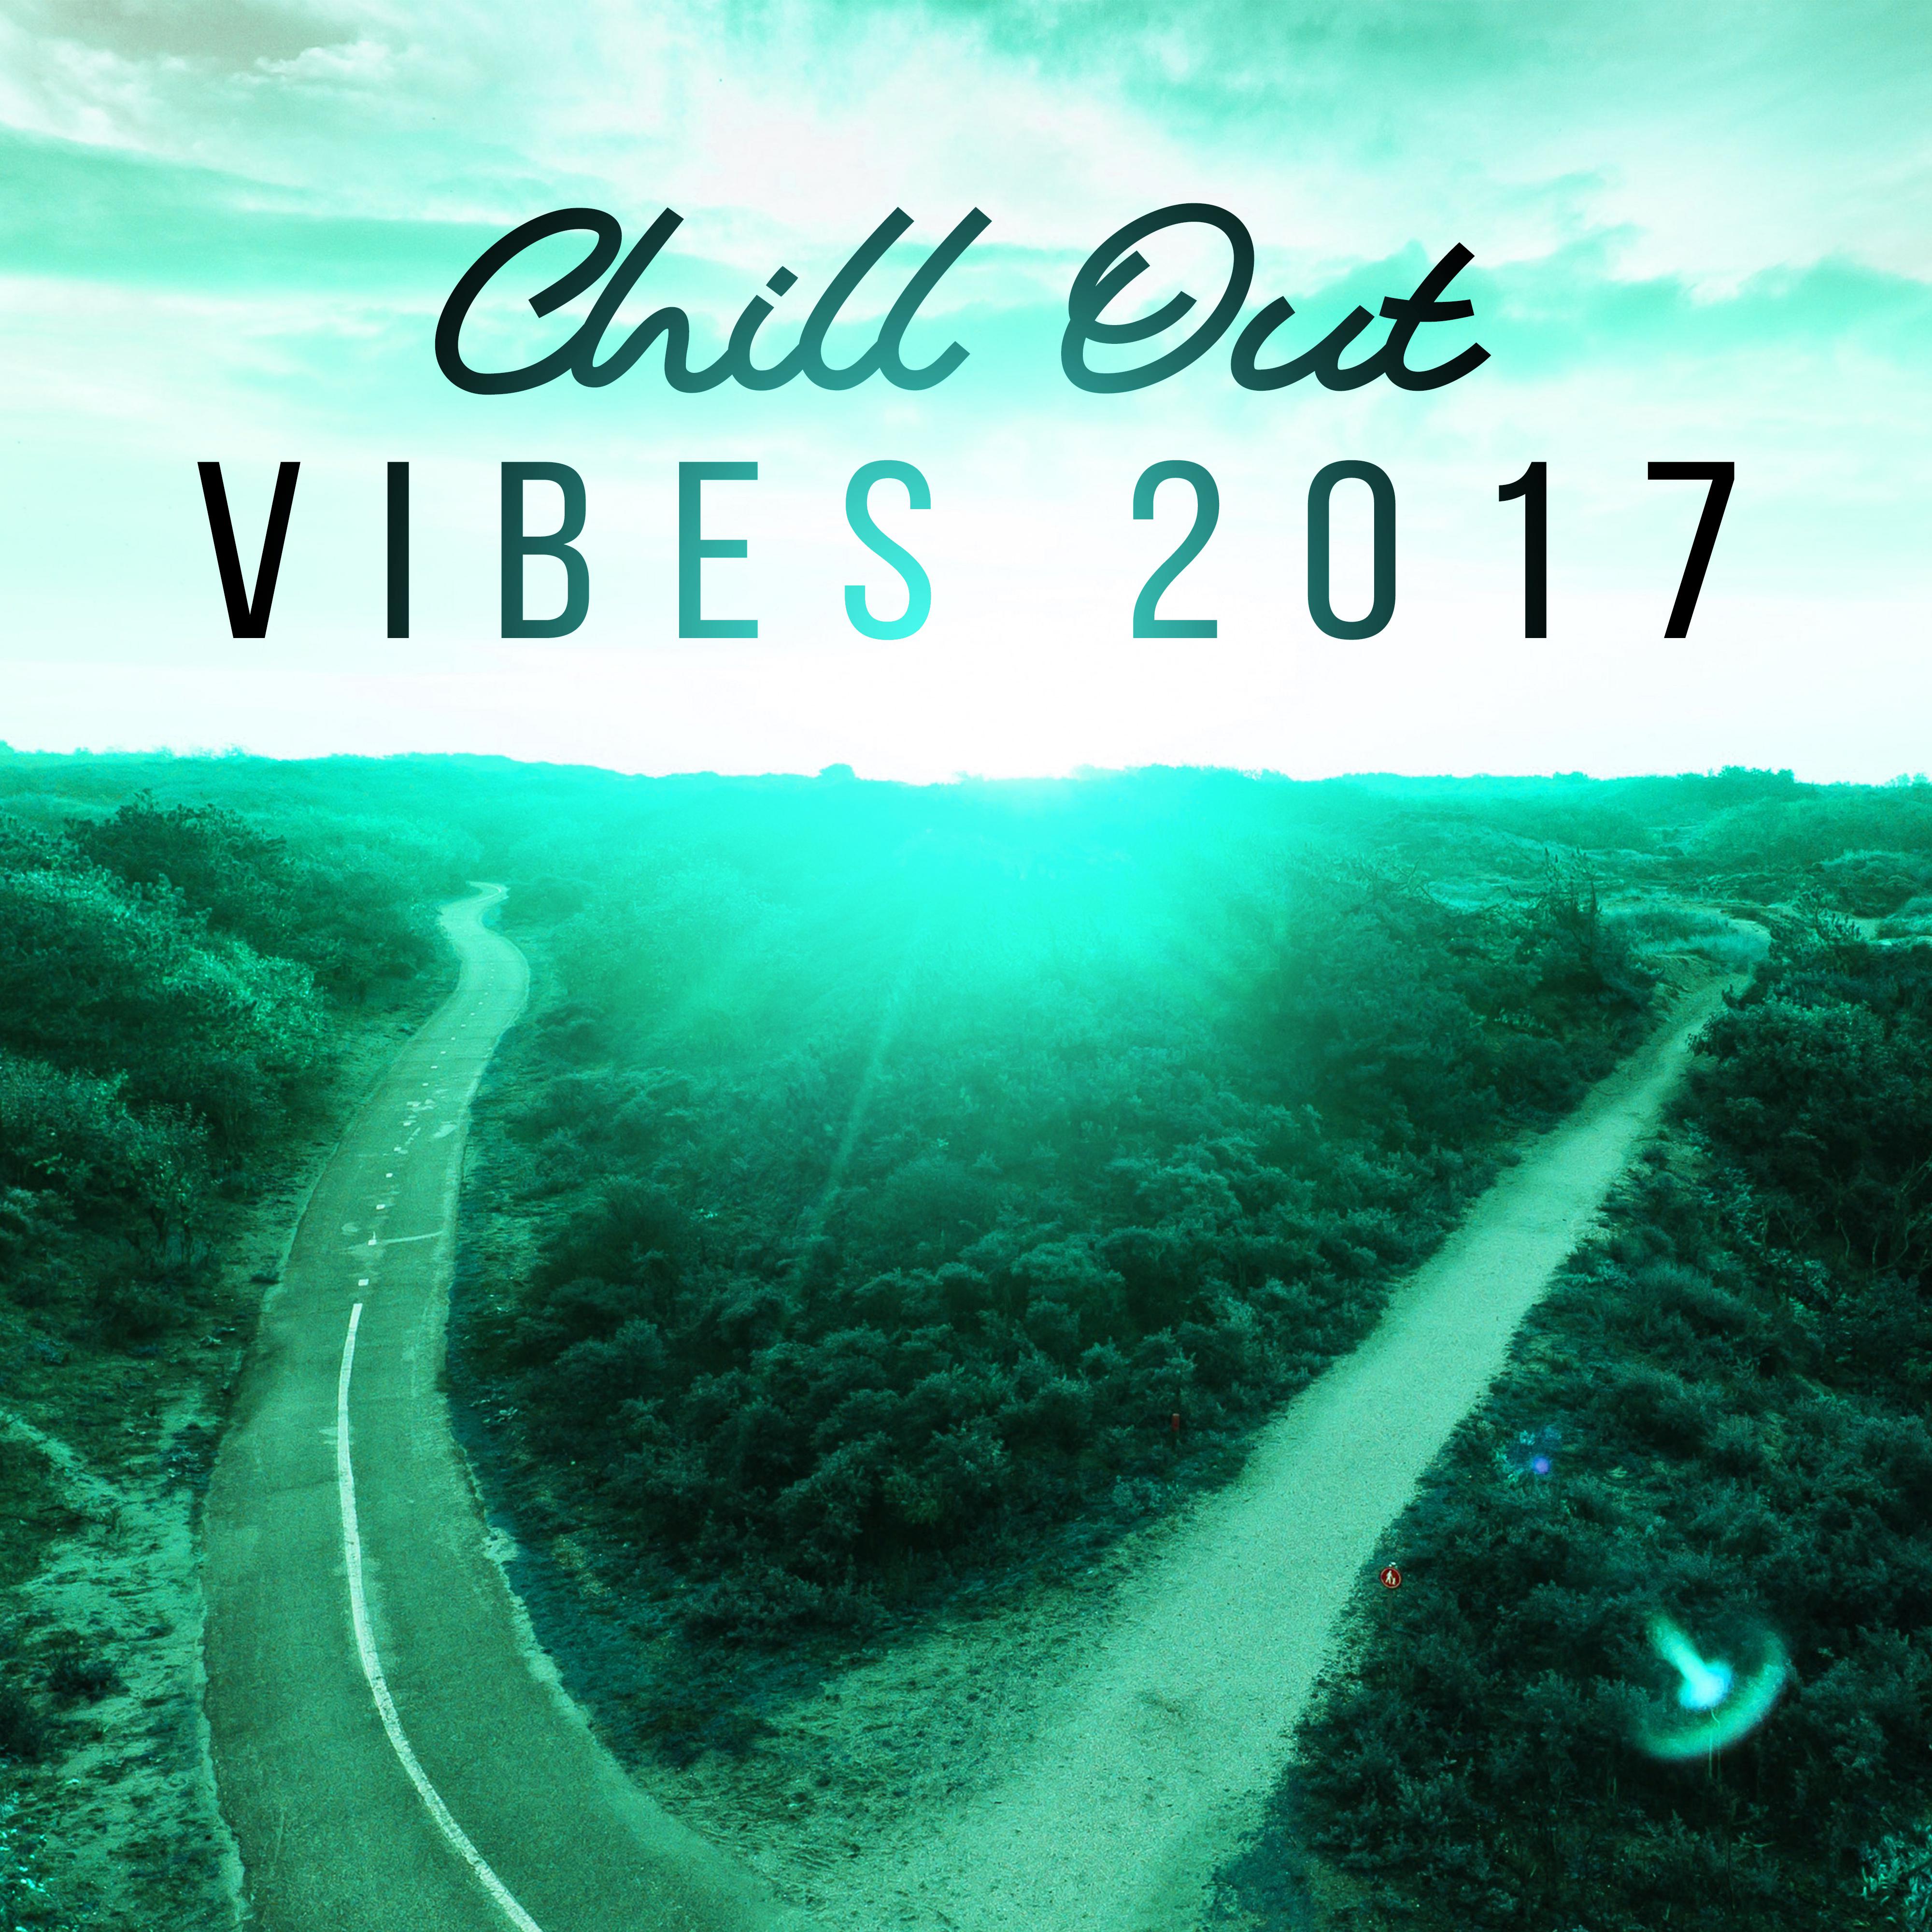 Chill Out Vibes 2017 – Ibiza Calmness, Holiday Beats, Sunbed Chill, Hot Summer